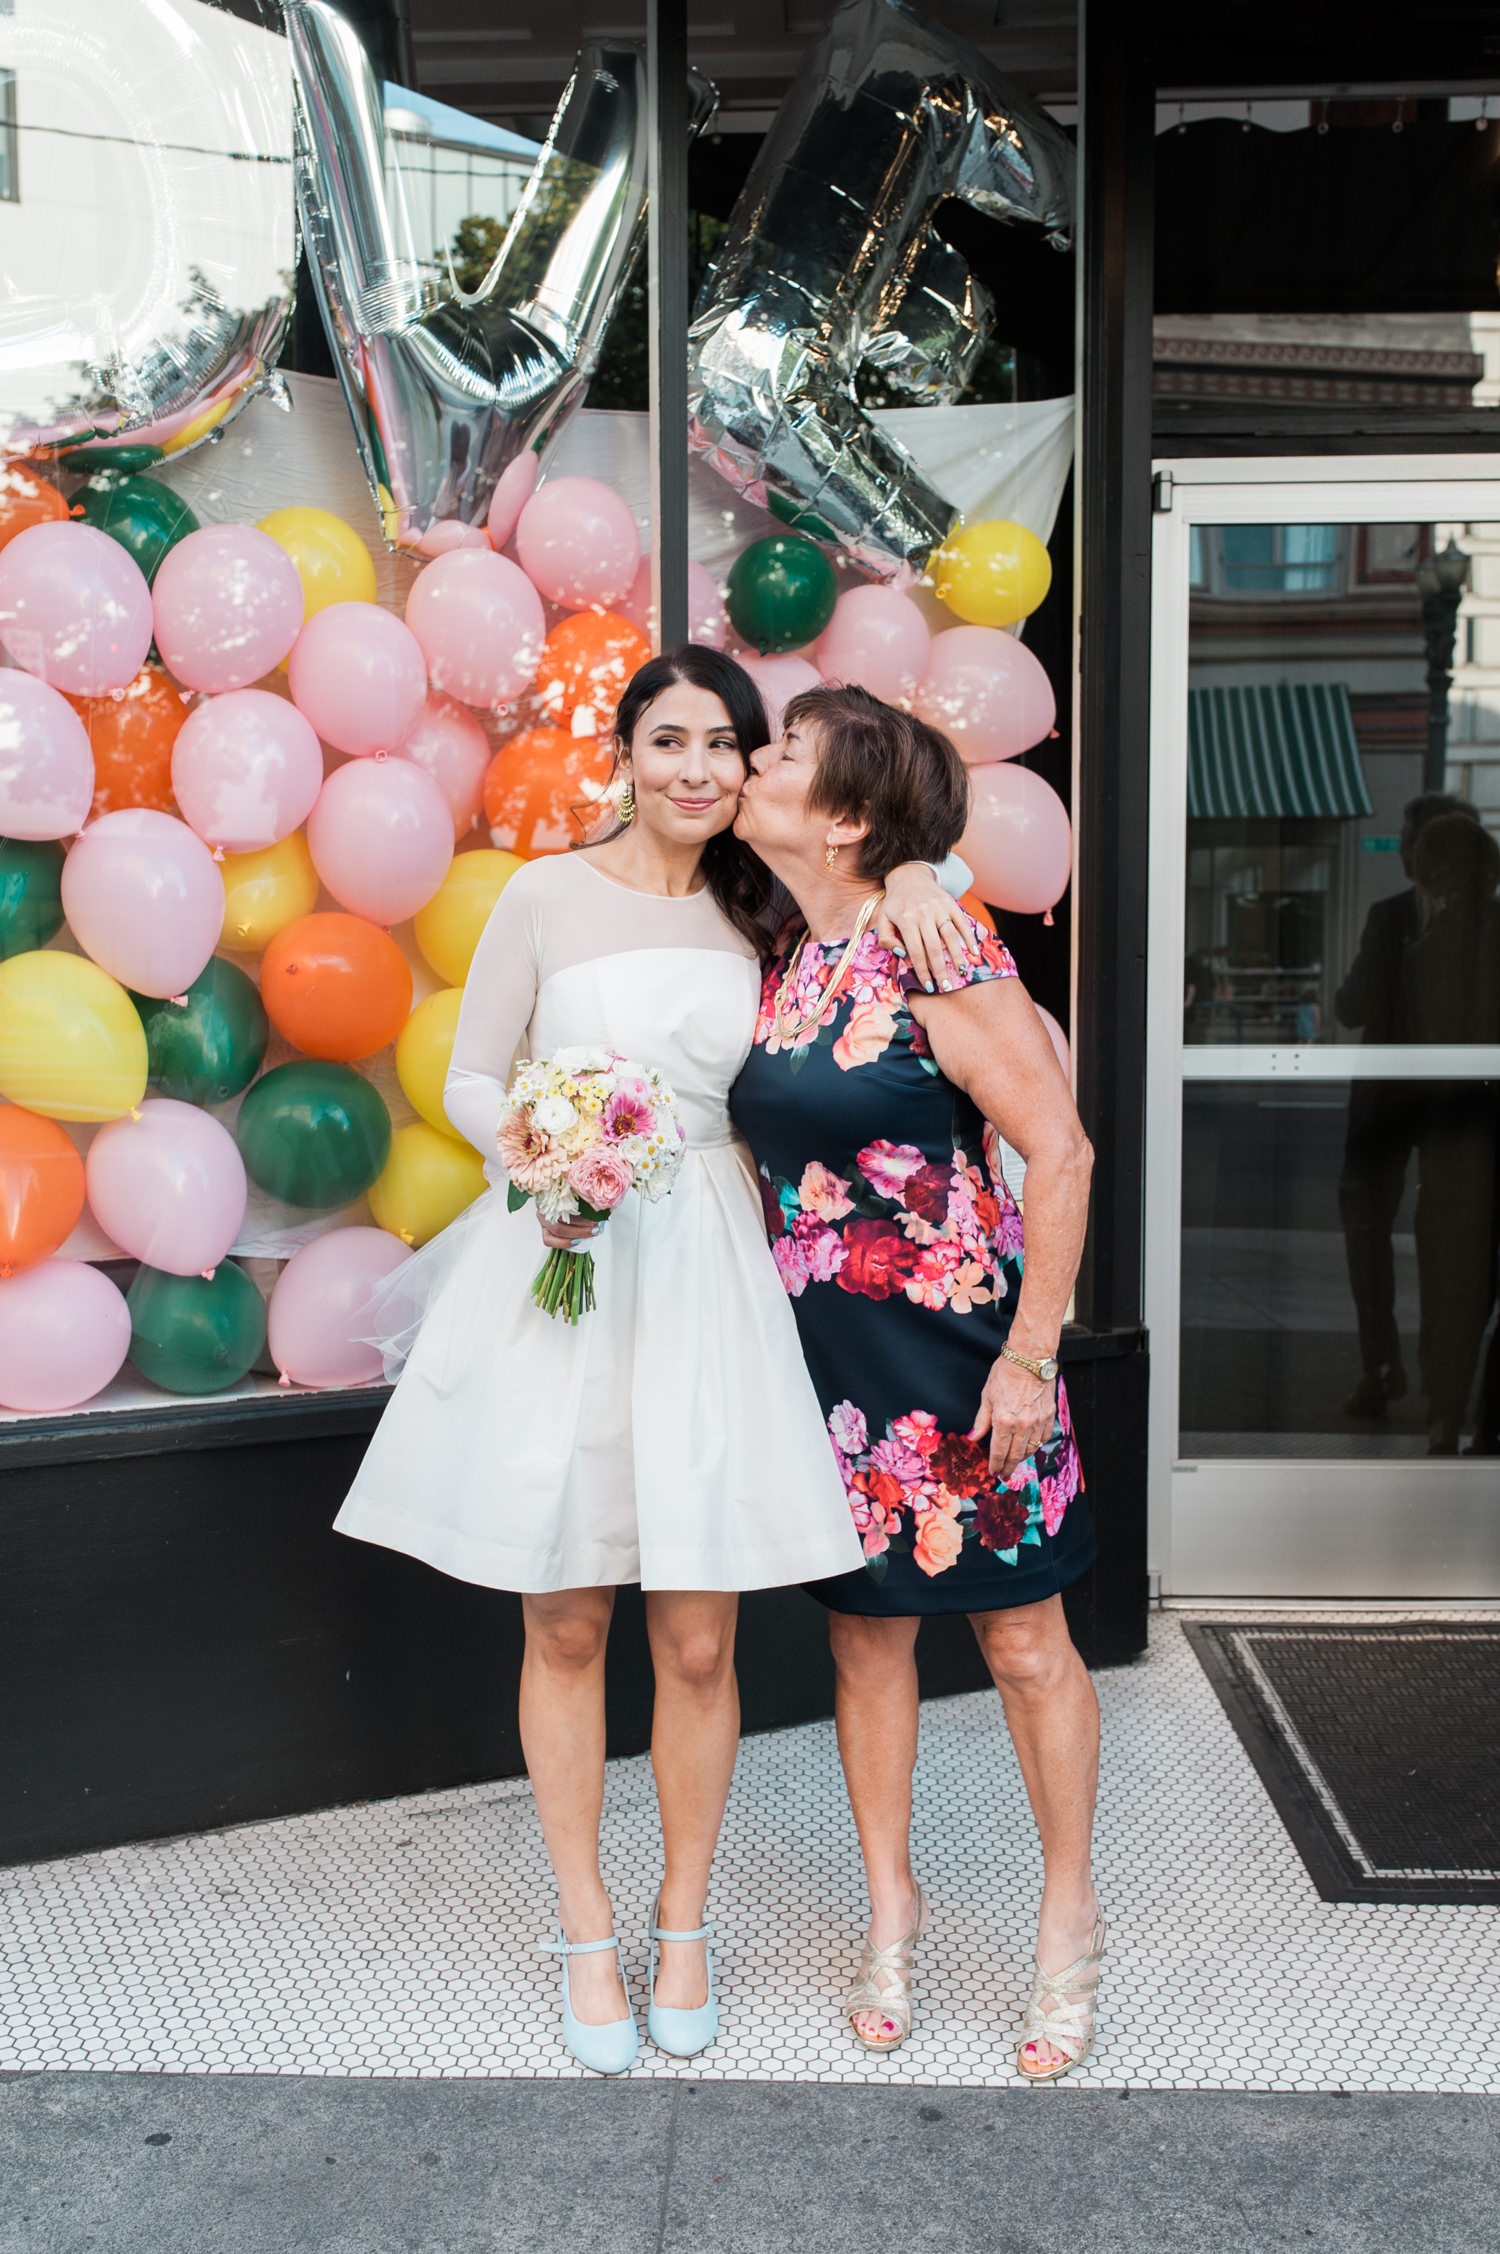 Colorful family portraits by Ace Hotel Wedding photographer Briana Morrison